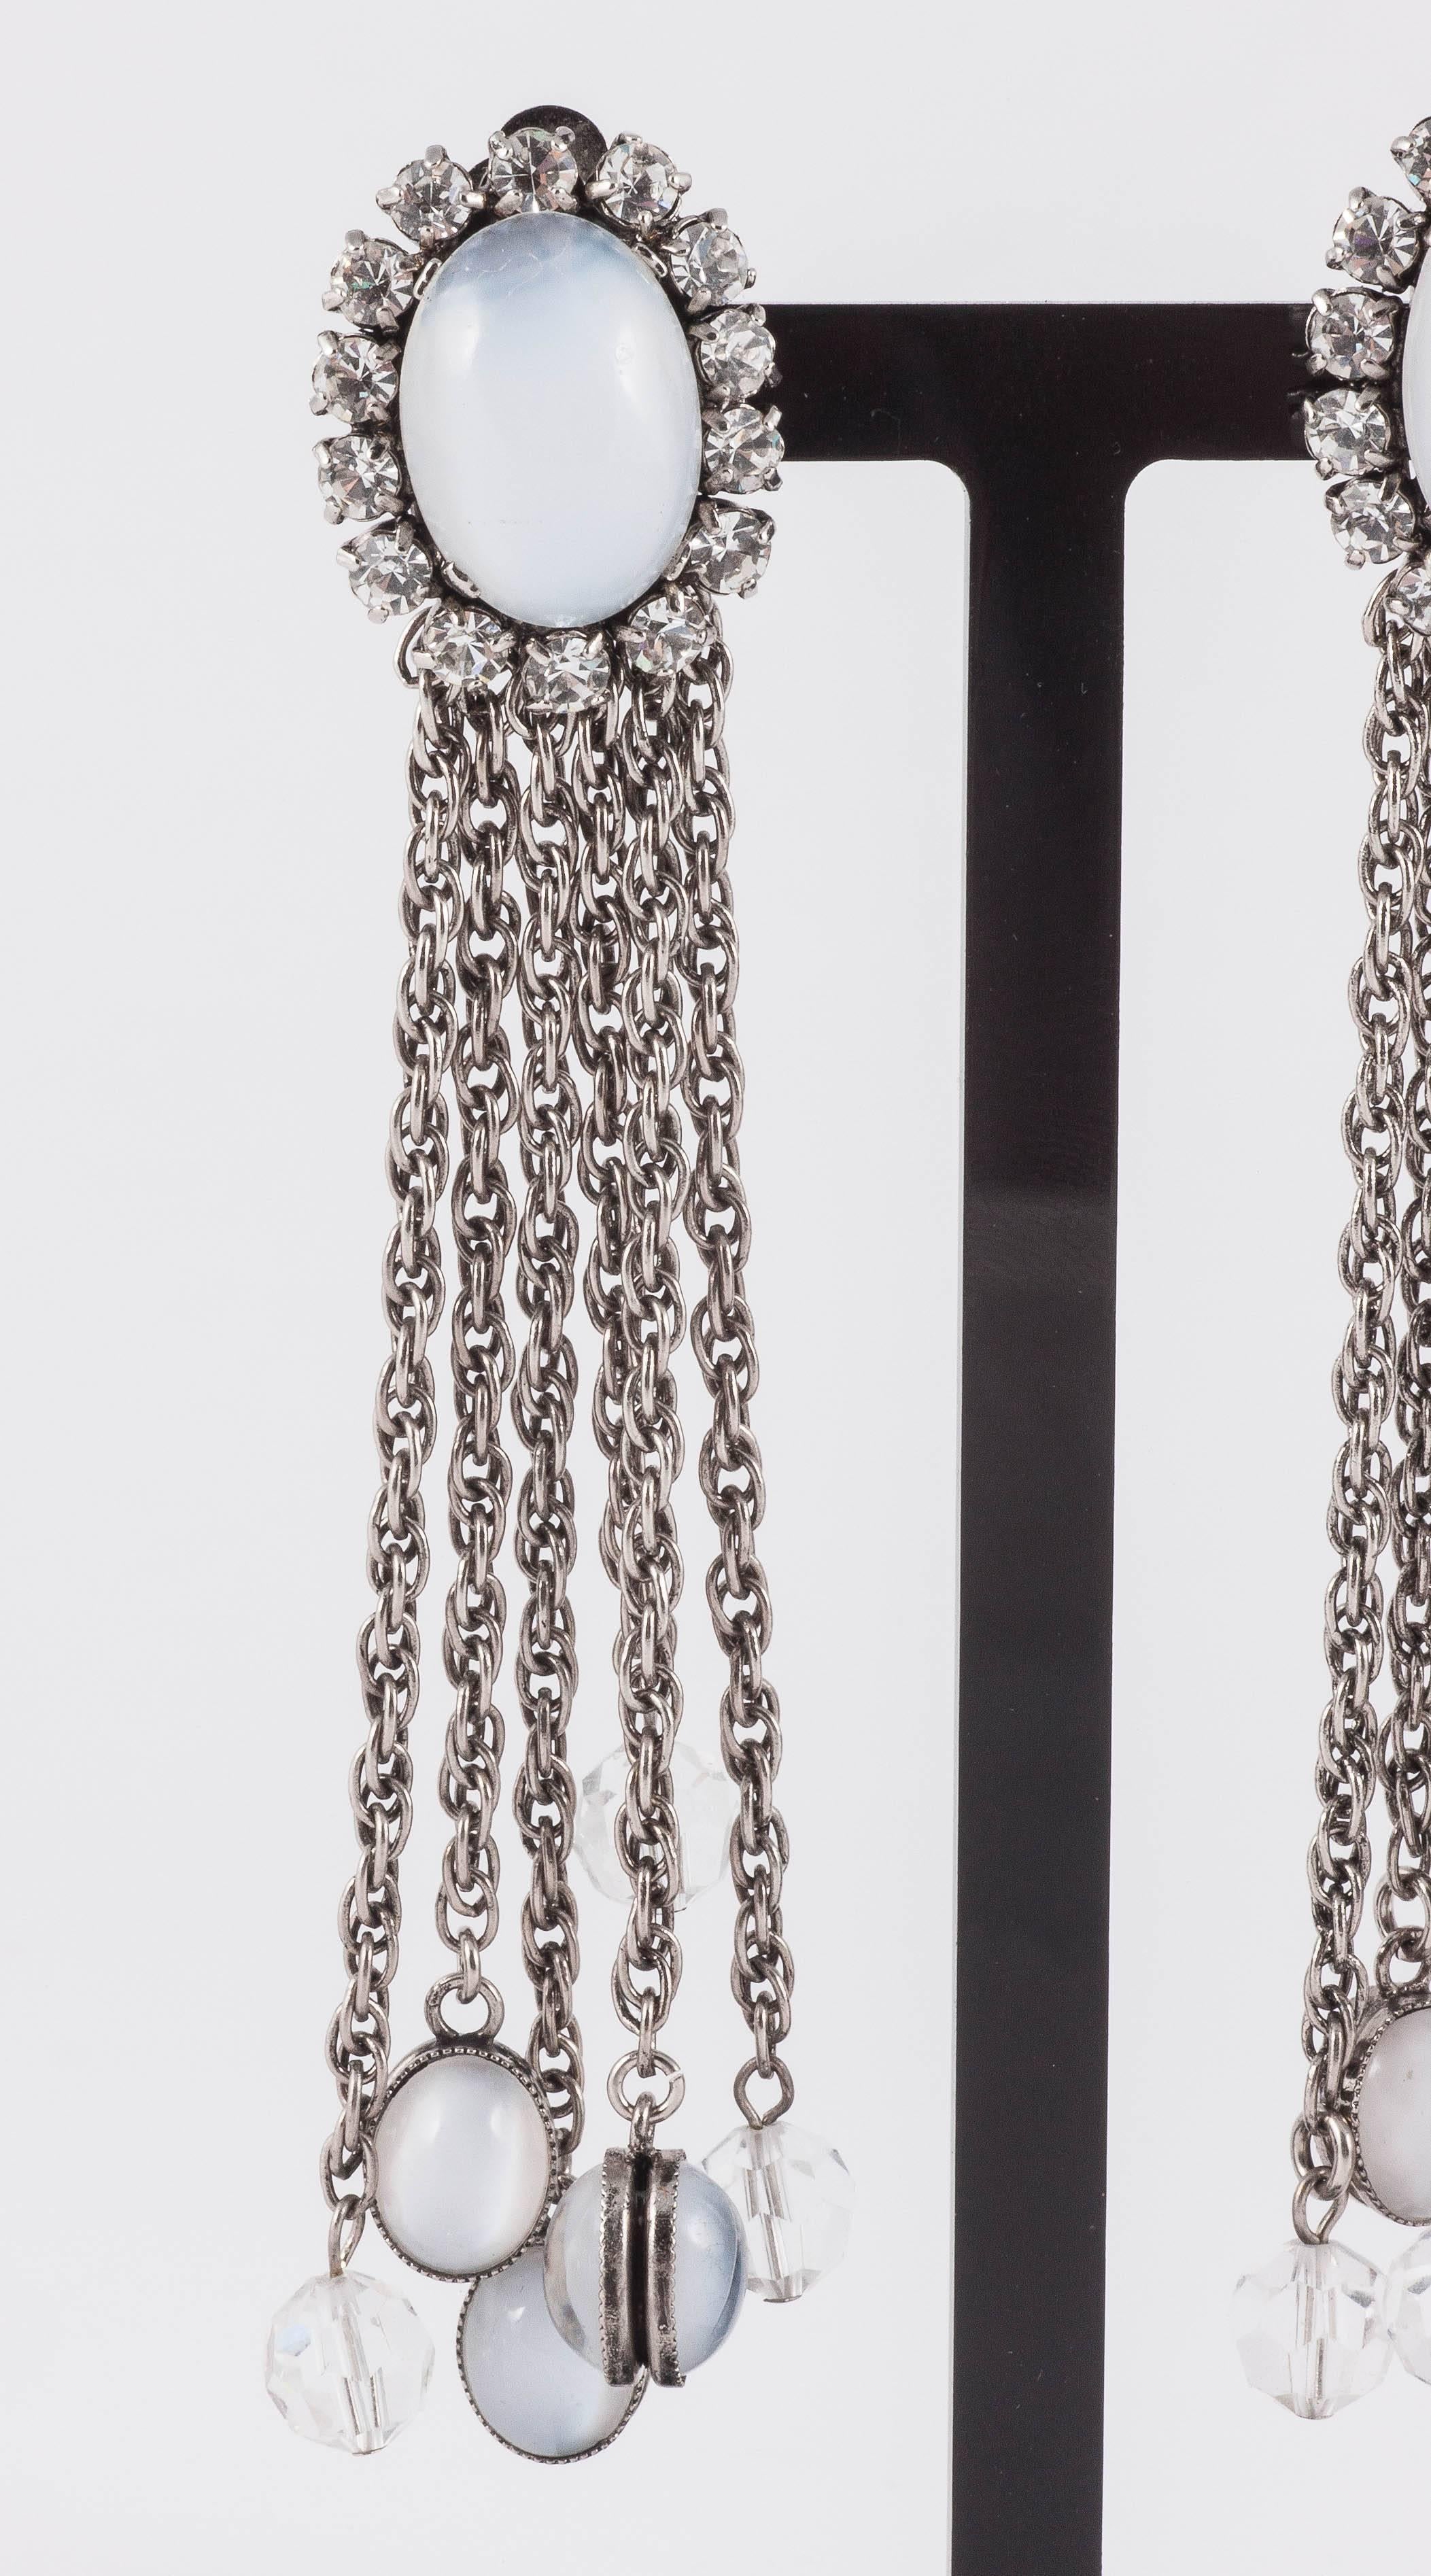 Not signed, but made in Germany in the early 1970s, these earrings have a really modern sensibility due to the hanging crystals and opaline orbs suspended from chains. Both debutante and punk in equal measure wear these with a ball gown or a leather